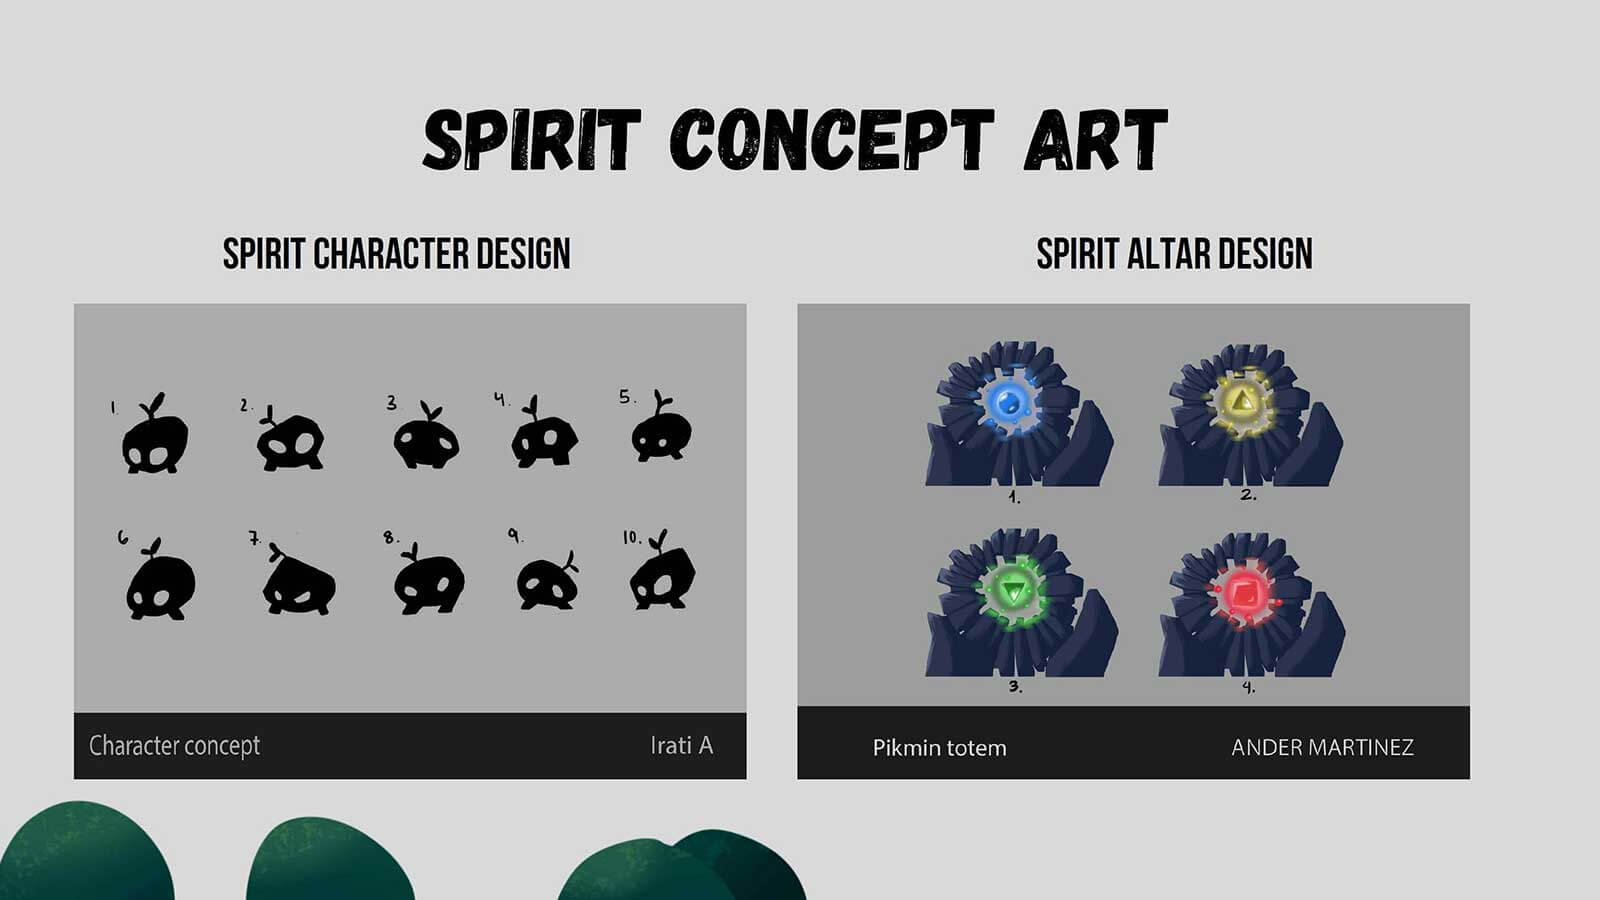 Spirit character and altar design concept art from the second-year game Zima Polaris, showcasing creative and mystical elements.